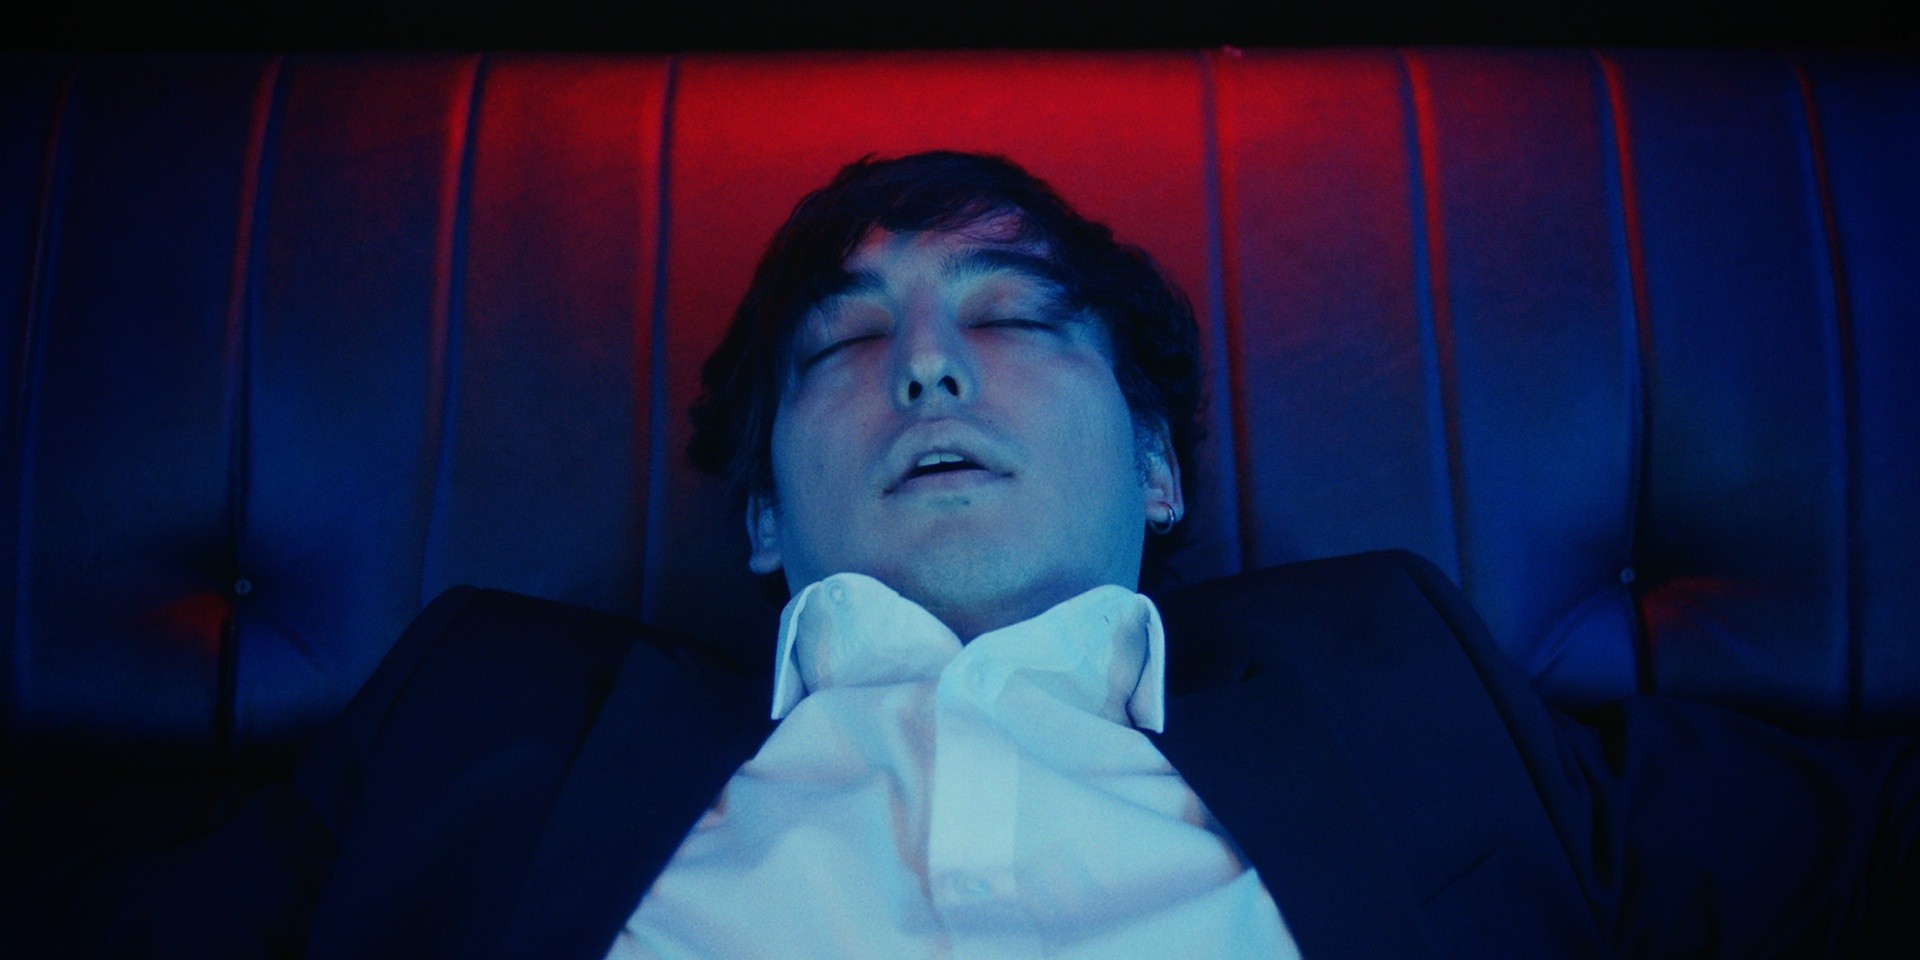 Here's how to win tickets to Joji's first online concert, The Extravaganza 